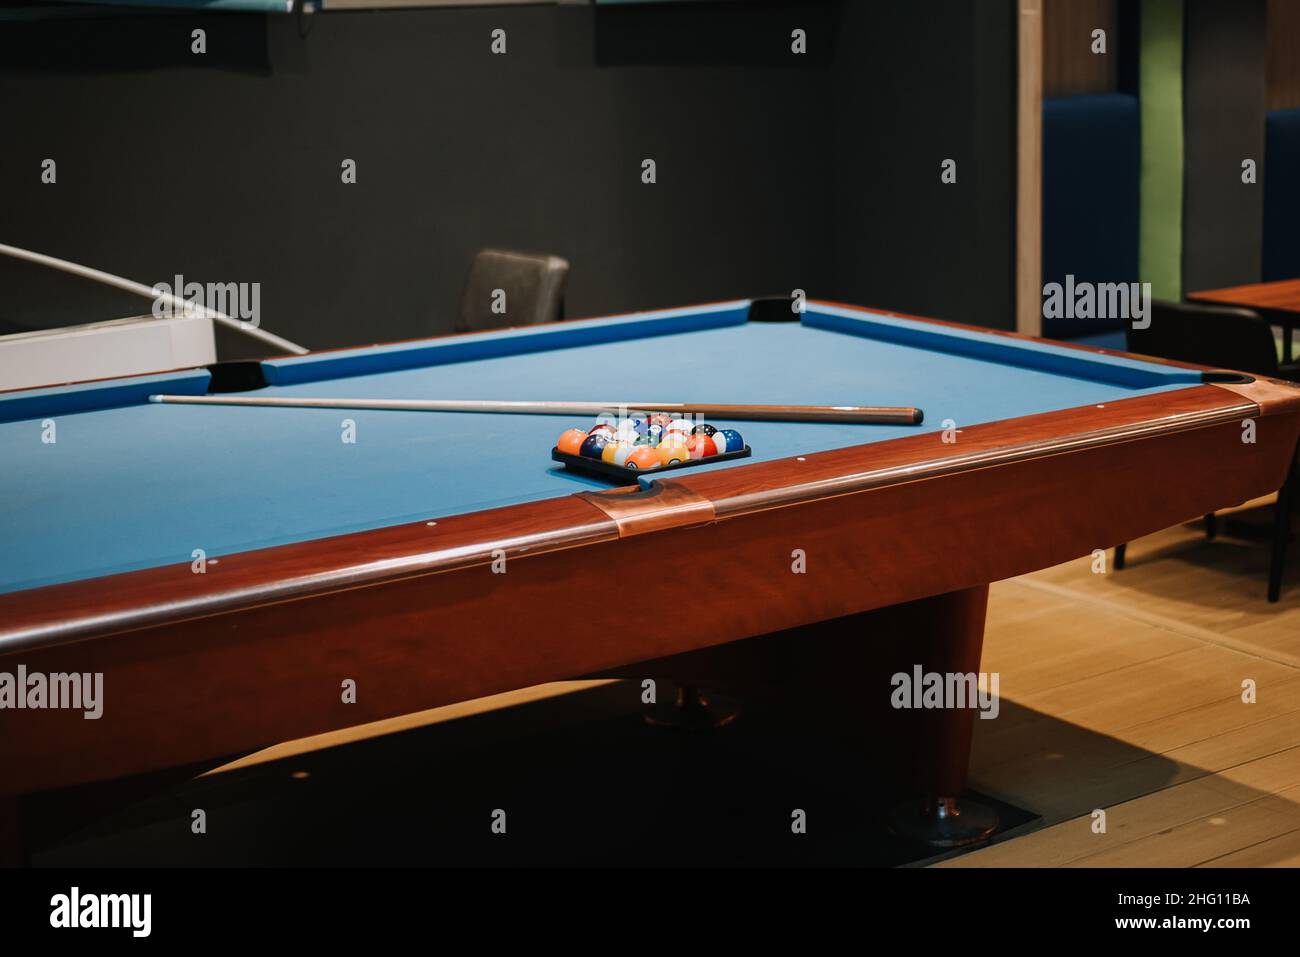 billiard pool table with stick and rack balls Stock Photo